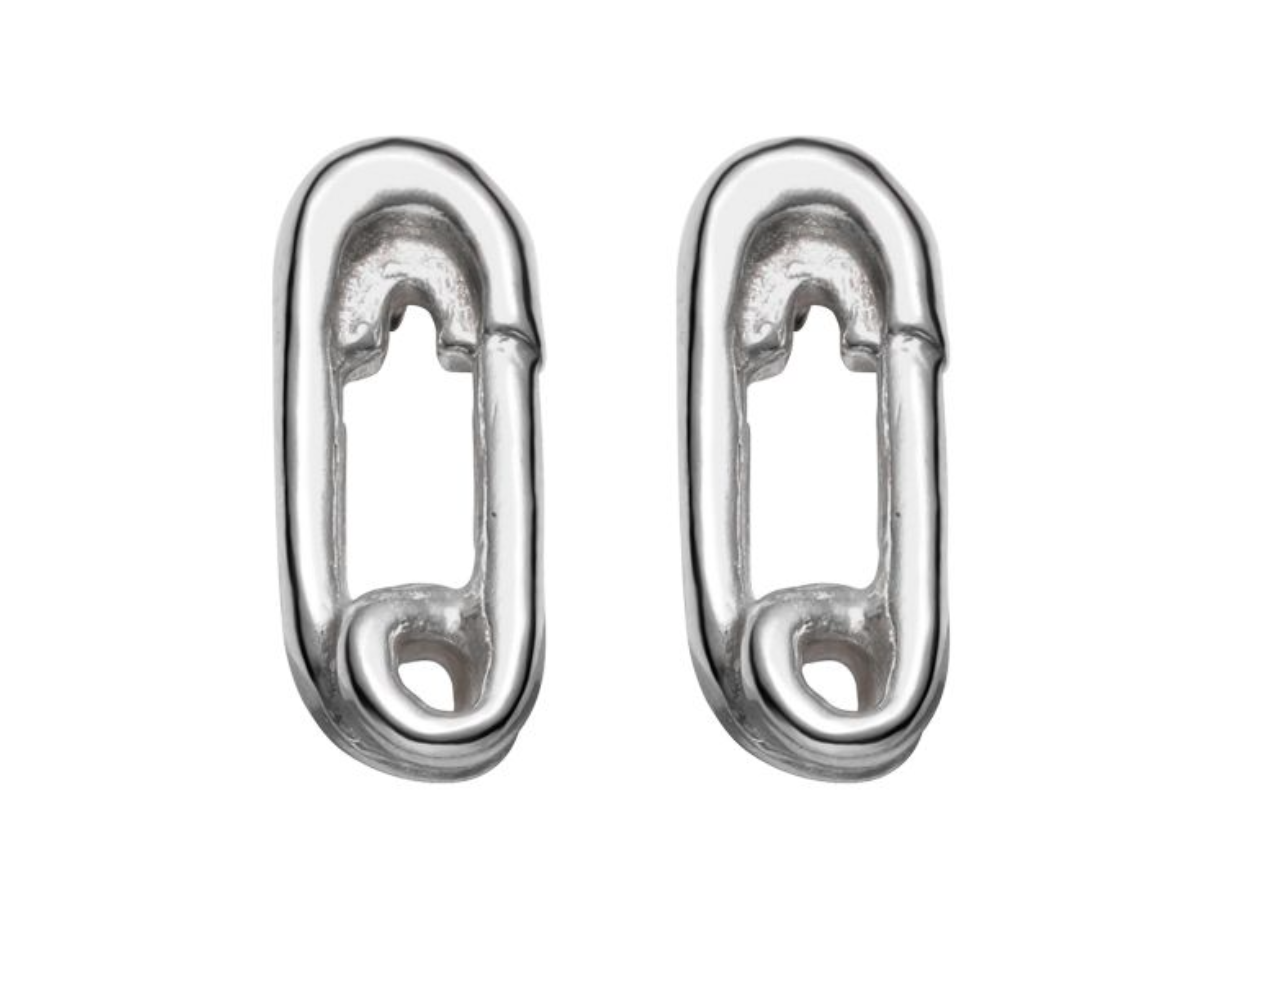 Tailor Made Safety Pin Earrings